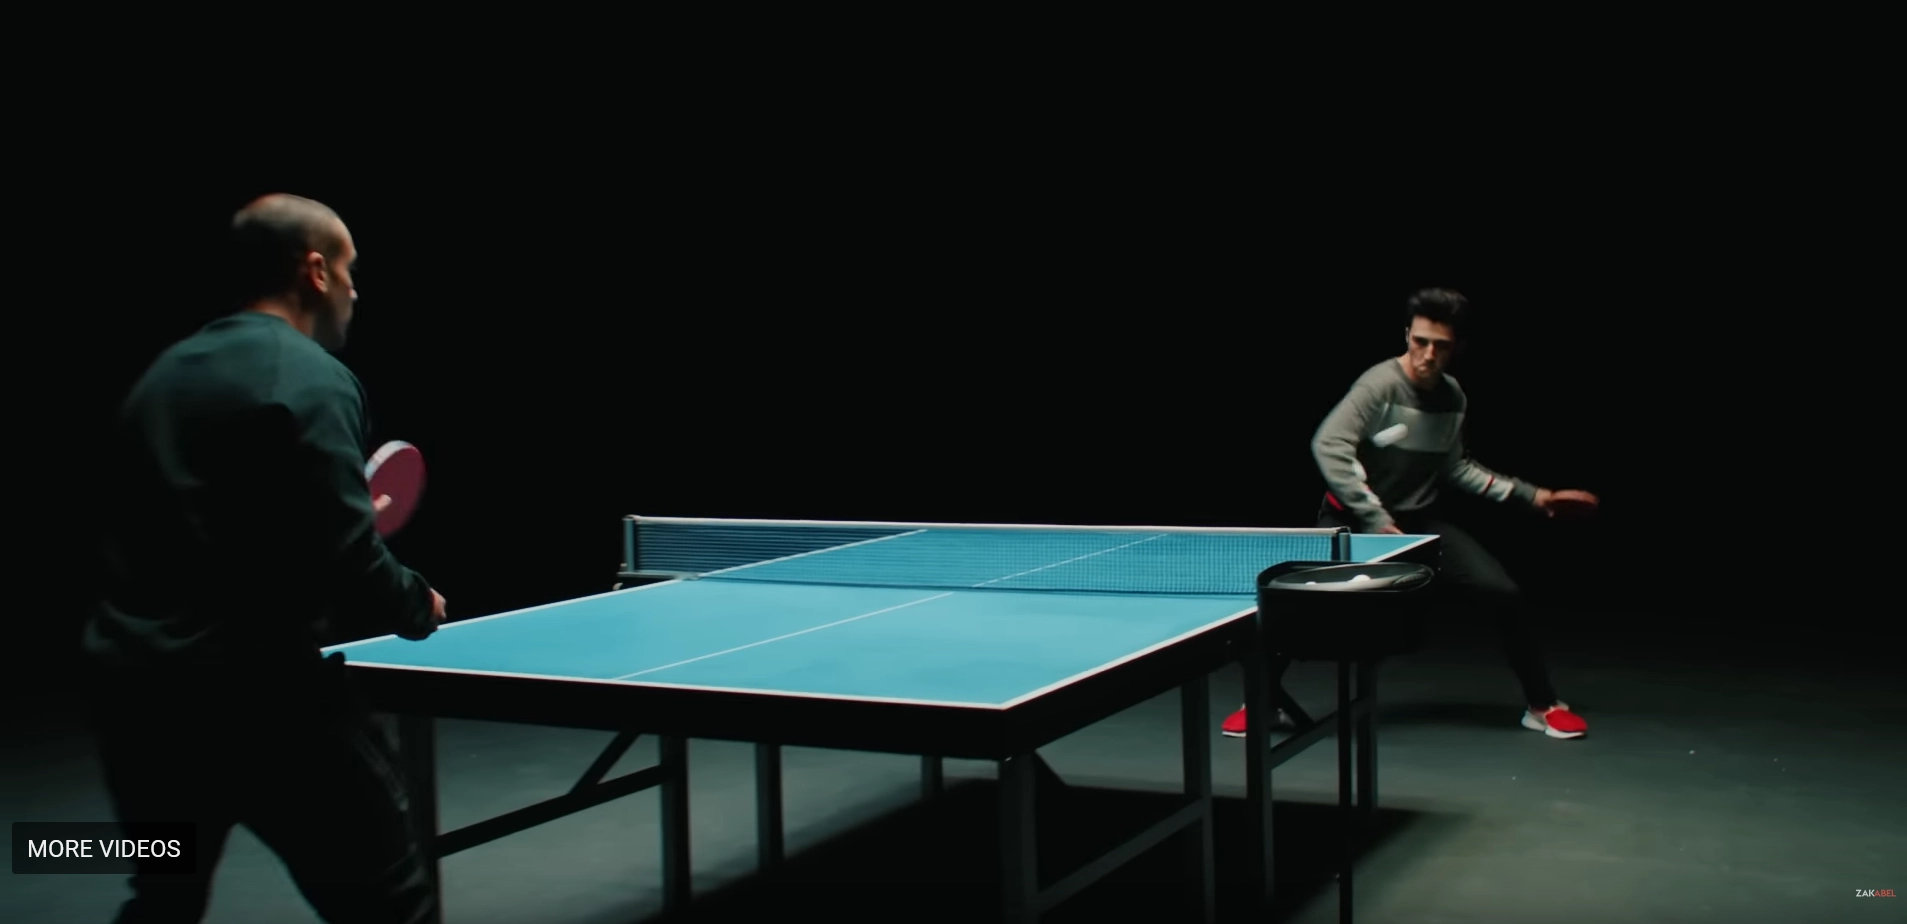 A dynamic scene where Zak Abel receives table tennis coaching from Eli Baraty during the music video for "Everybody Needs Love." Both individuals are focused and engaged, with Abel preparing for a shot under Baraty's attentive guidance, showcasing a moment of learning and determination amidst the rhythm of the song.